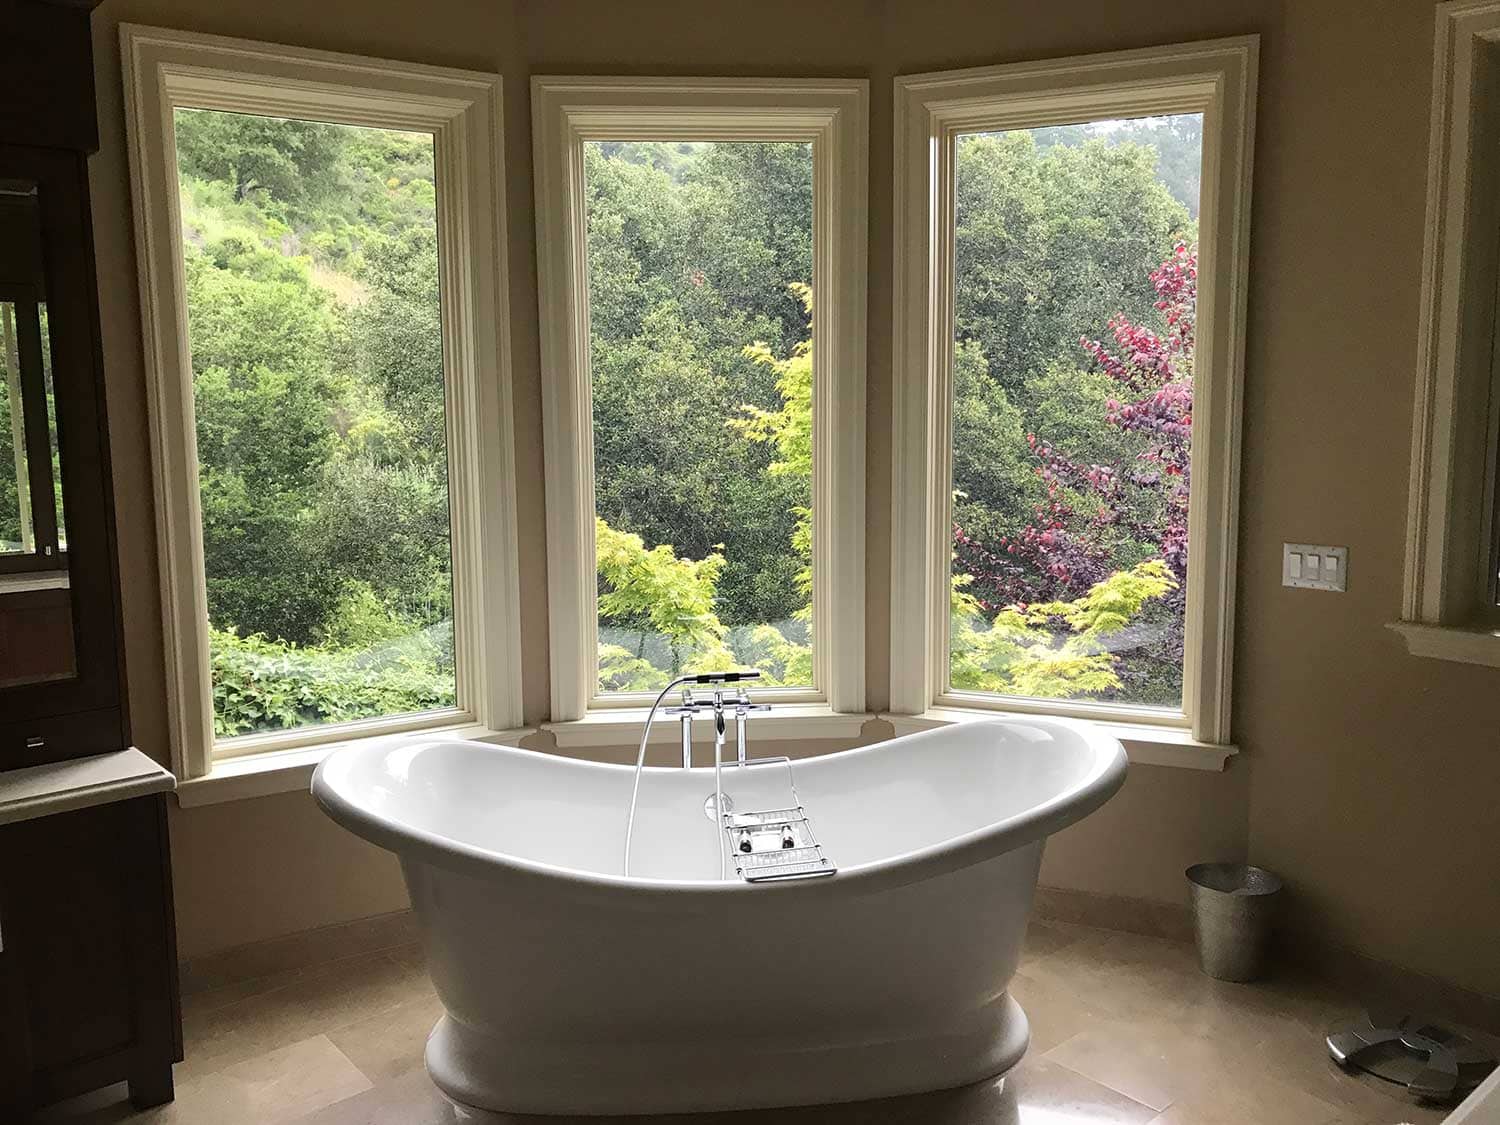 Why Use Window Film in Your Bathroom